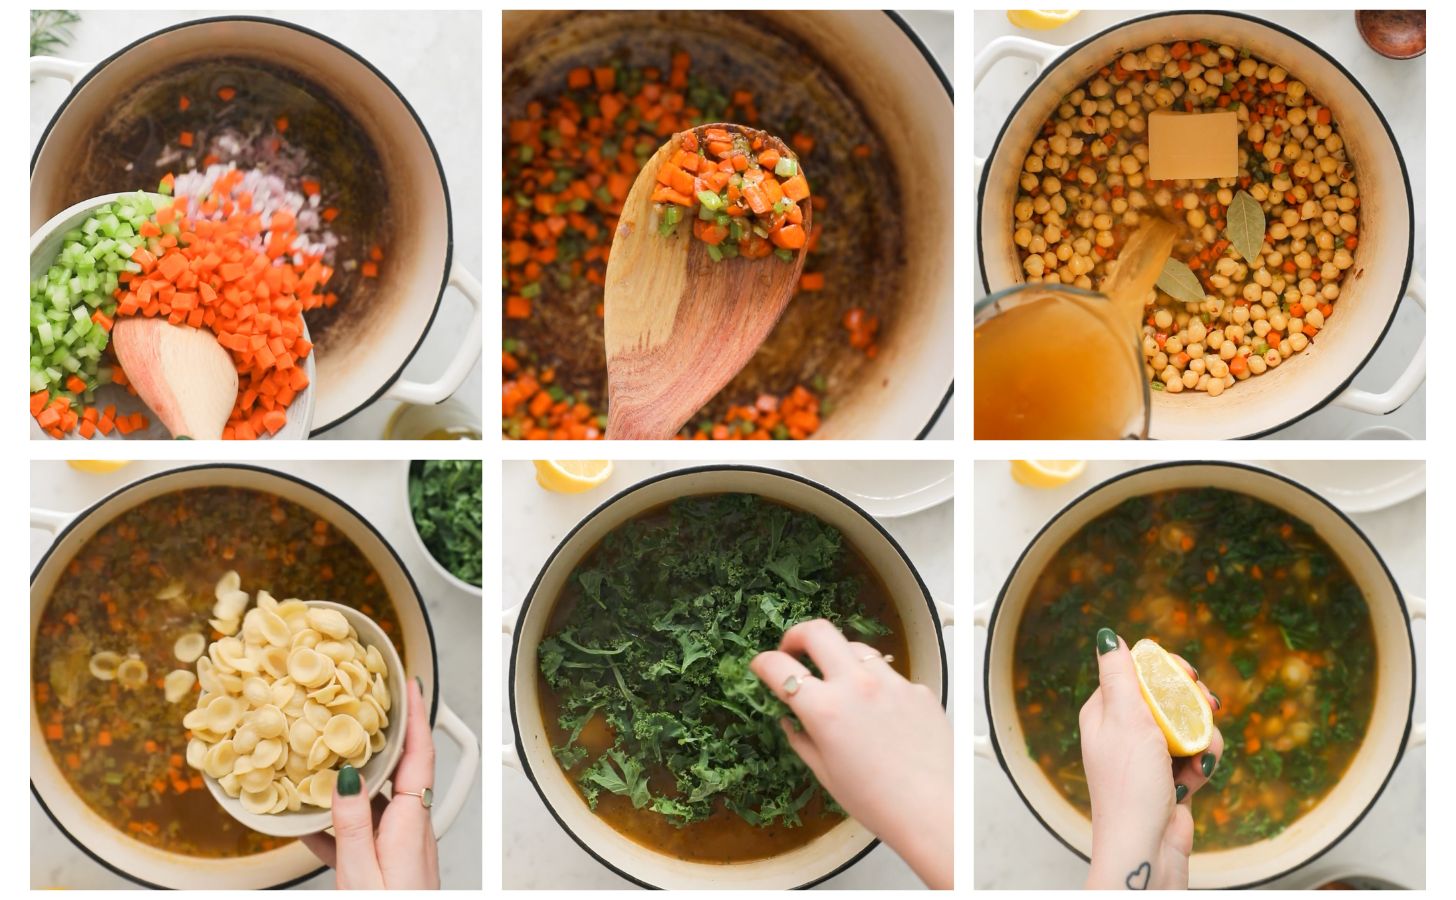 Six images to making garbanzo bean soup. In photo 1, a wood spoon is spooning carrots, celery, and shallots into a white pot. In photo 2, the spoon has sauteed mirepoix on it. In the third photo, veggie broth is being poured in a white pot of chickpeas and veggies. In photo 4, a hand is pouring pasta into the pot. In photo 5, a hand is placing kale into the soup. In photo 6, a hand is squeezing a lemon into the soup.